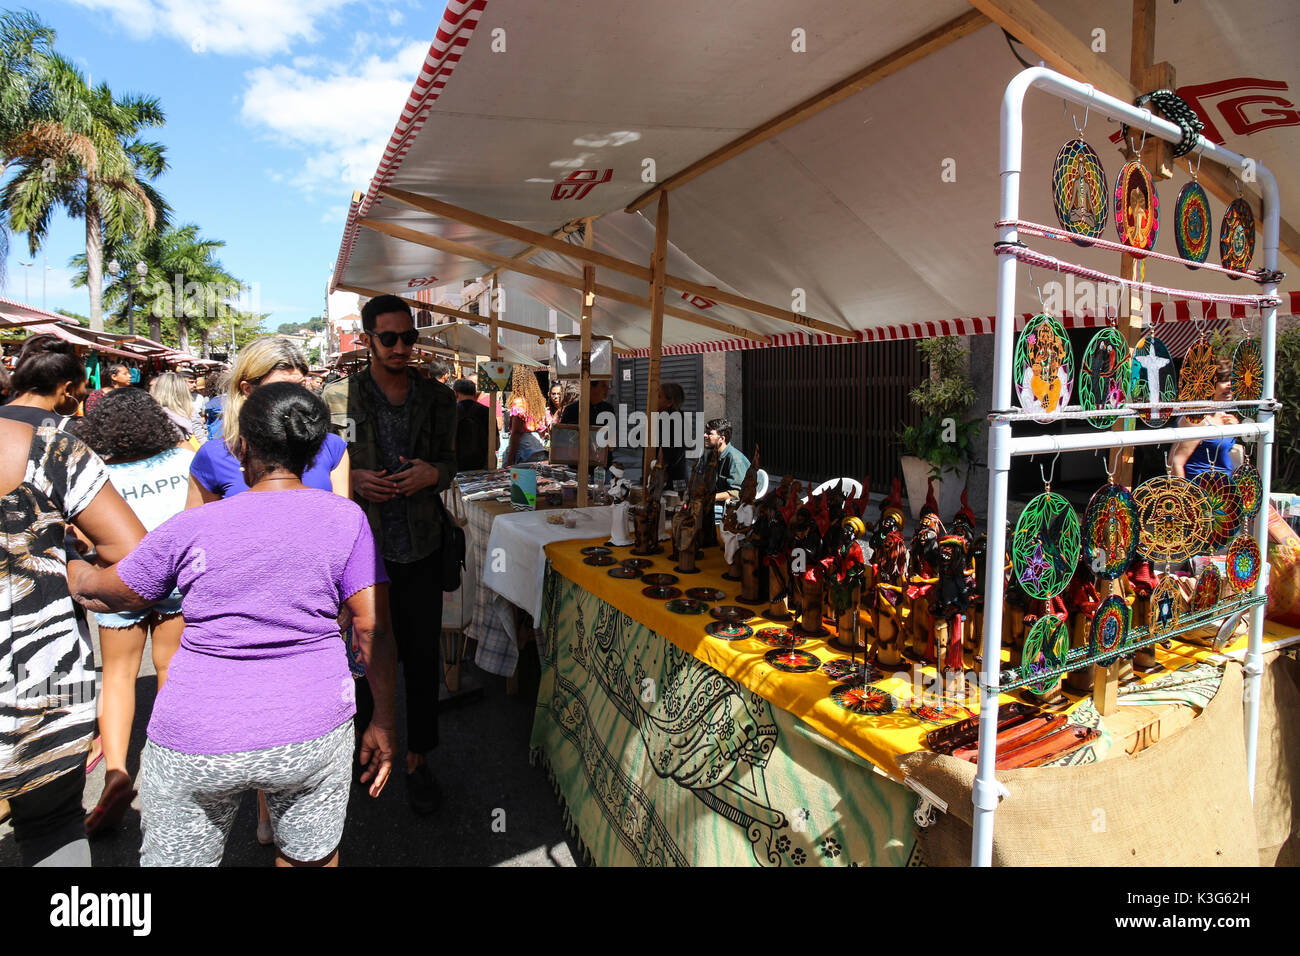 Rio de Janeiro, Brazil, September 02, 2017: Hundreds of collectors of antiques, artisans and artists exhibit their products in tents along Rua do Lavradio, one of the oldest streets in the center of Rio. people take advantage of the cultural program for shopping and also to enjoy the gastronomy of the restaurants of the region of Lapa, where the fair happens. Credit: Luiz Souza/Alamy Live News Stock Photo